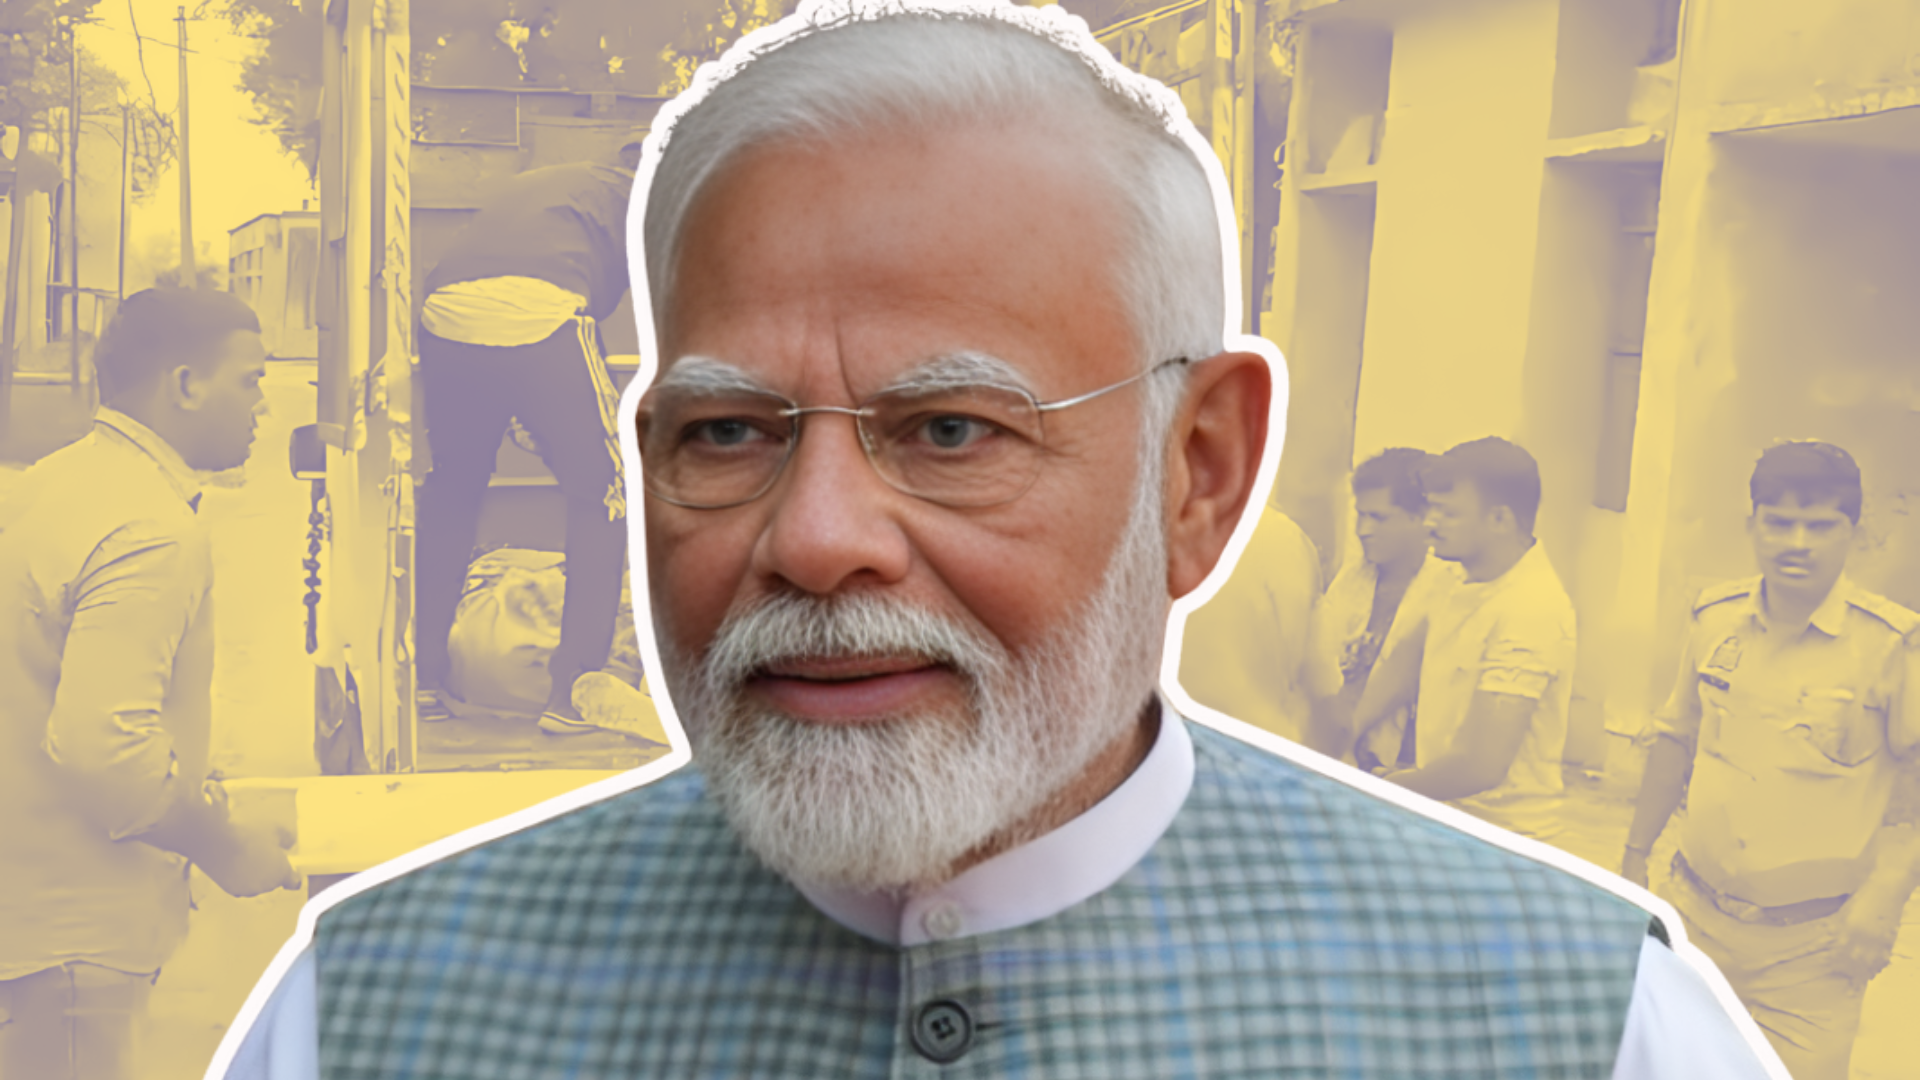 Hathras Tragedy: PM Modi Condoles Death Of Nearly 100 People Killed In Stampede At A Religious Event